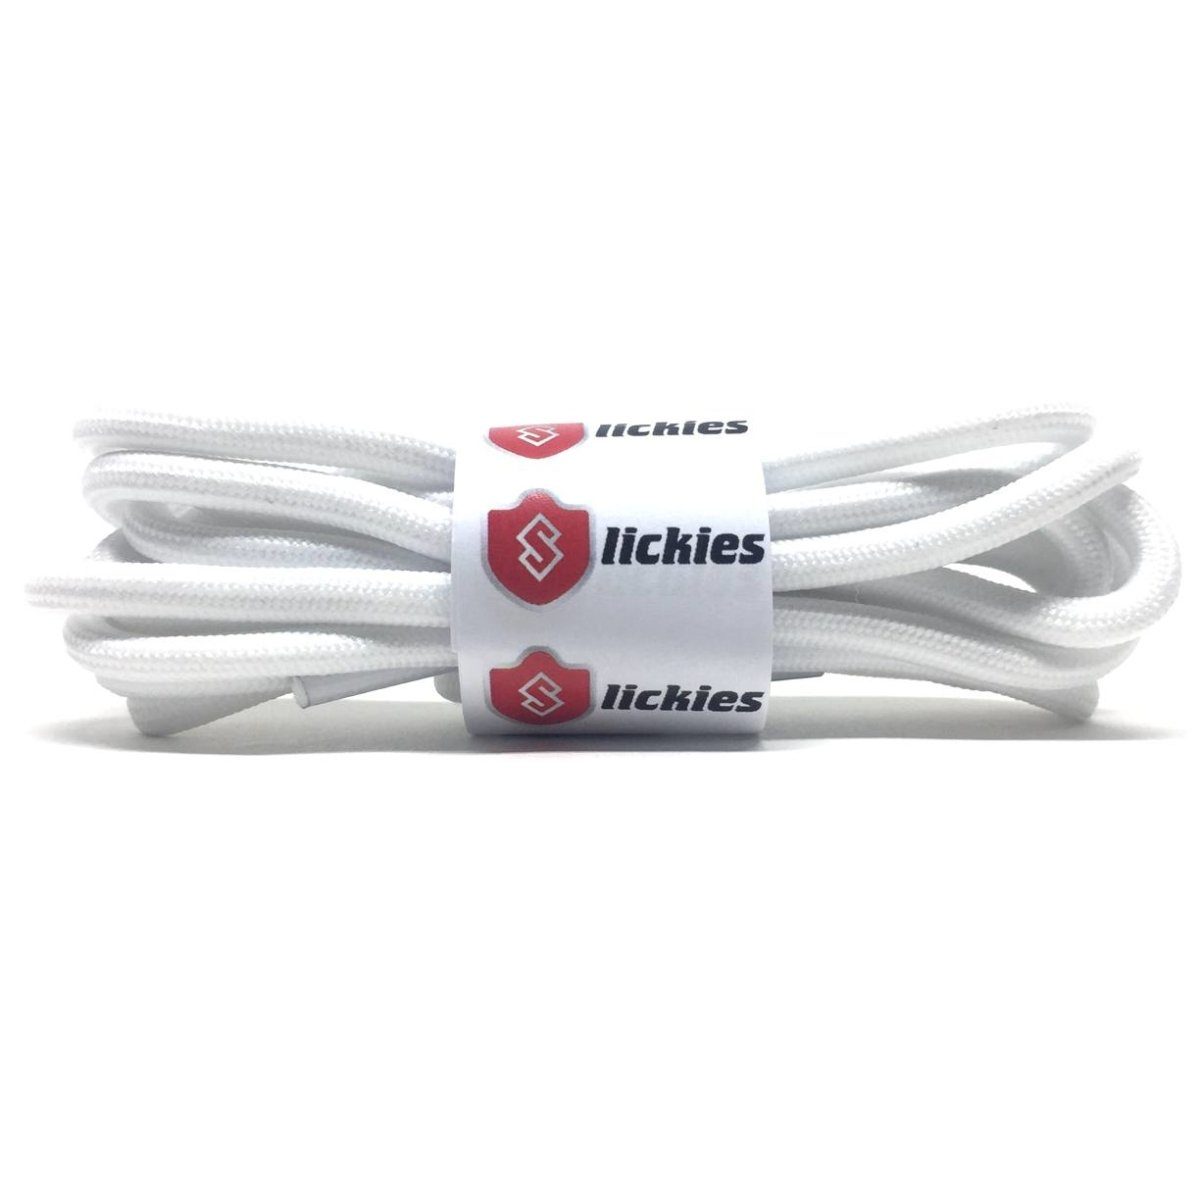 Shop High-Quality Rope Laces at Slickies Laces